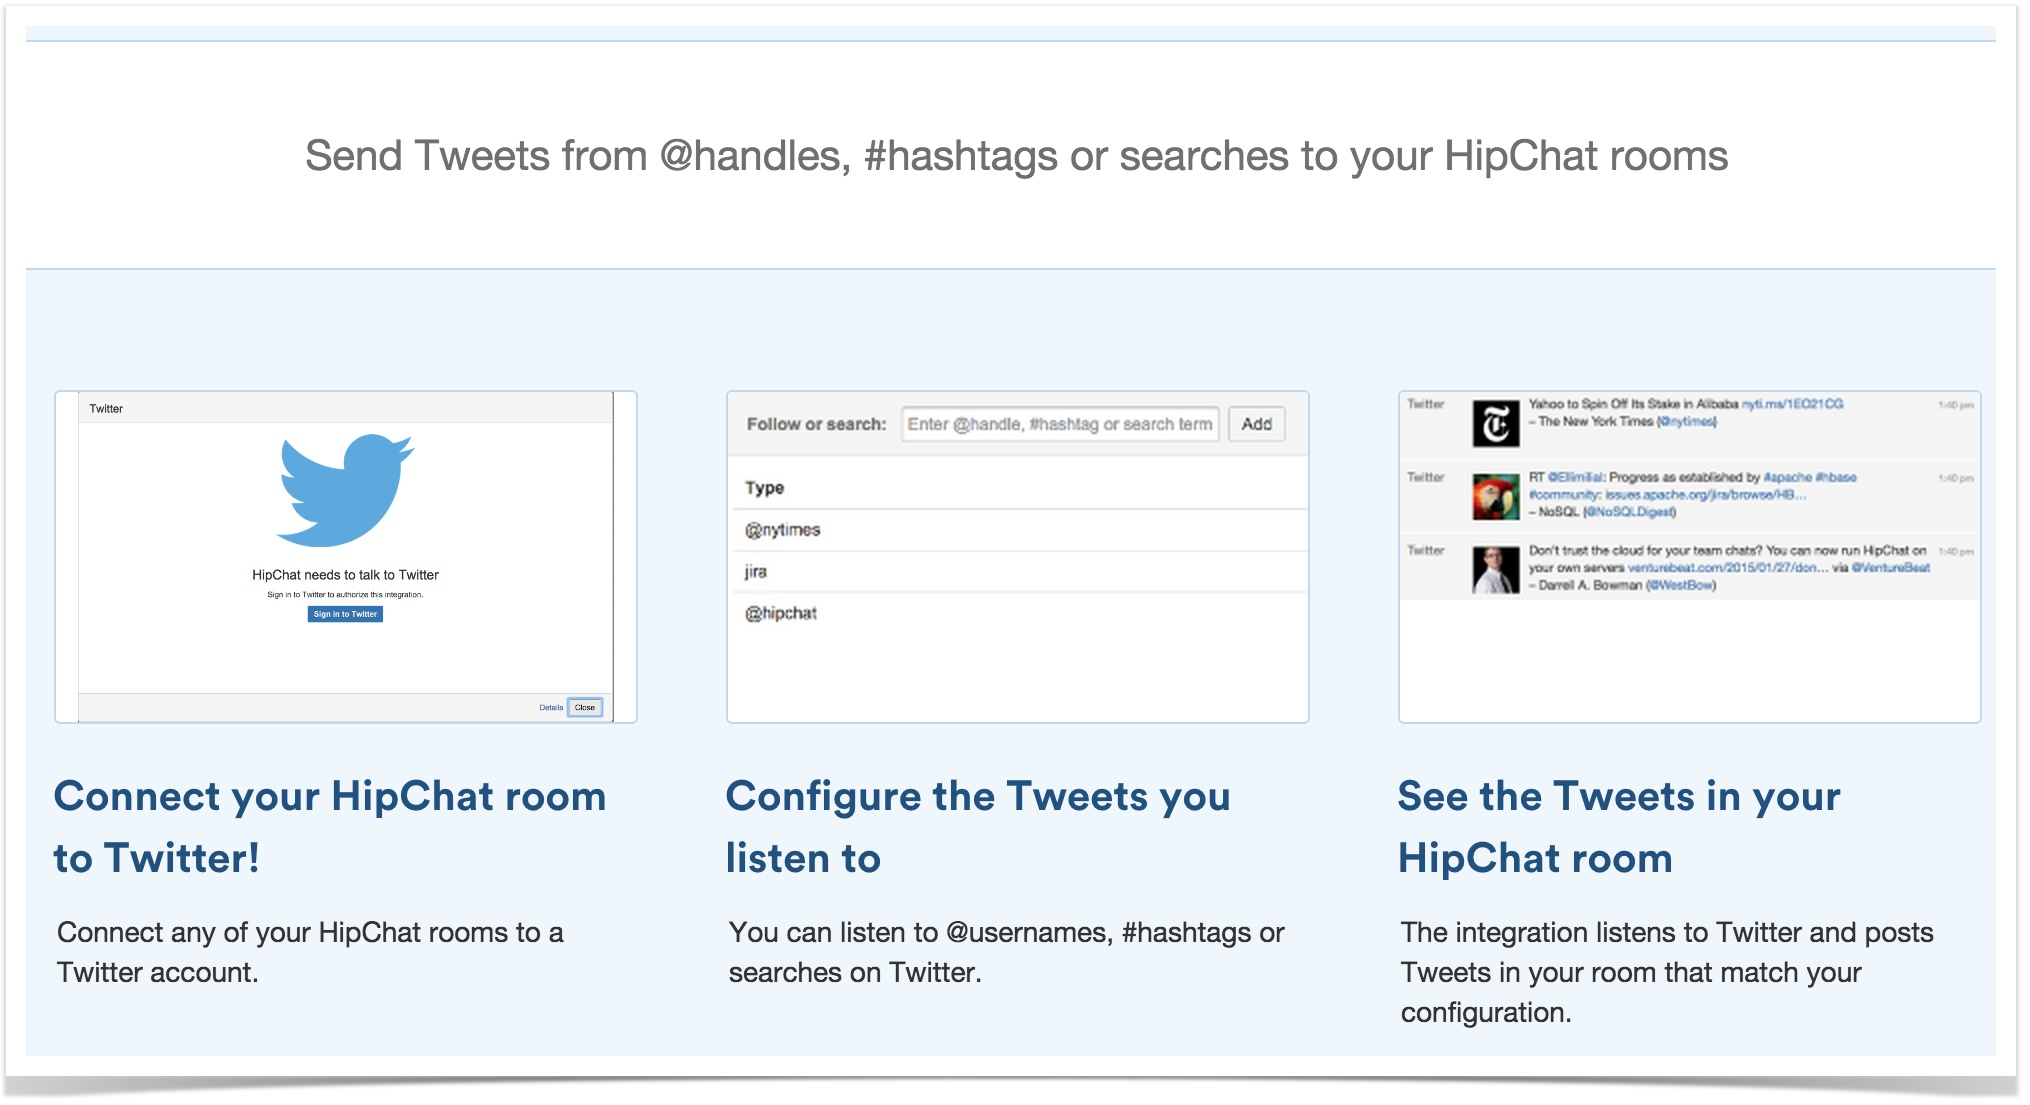 Integrating with Hipchat